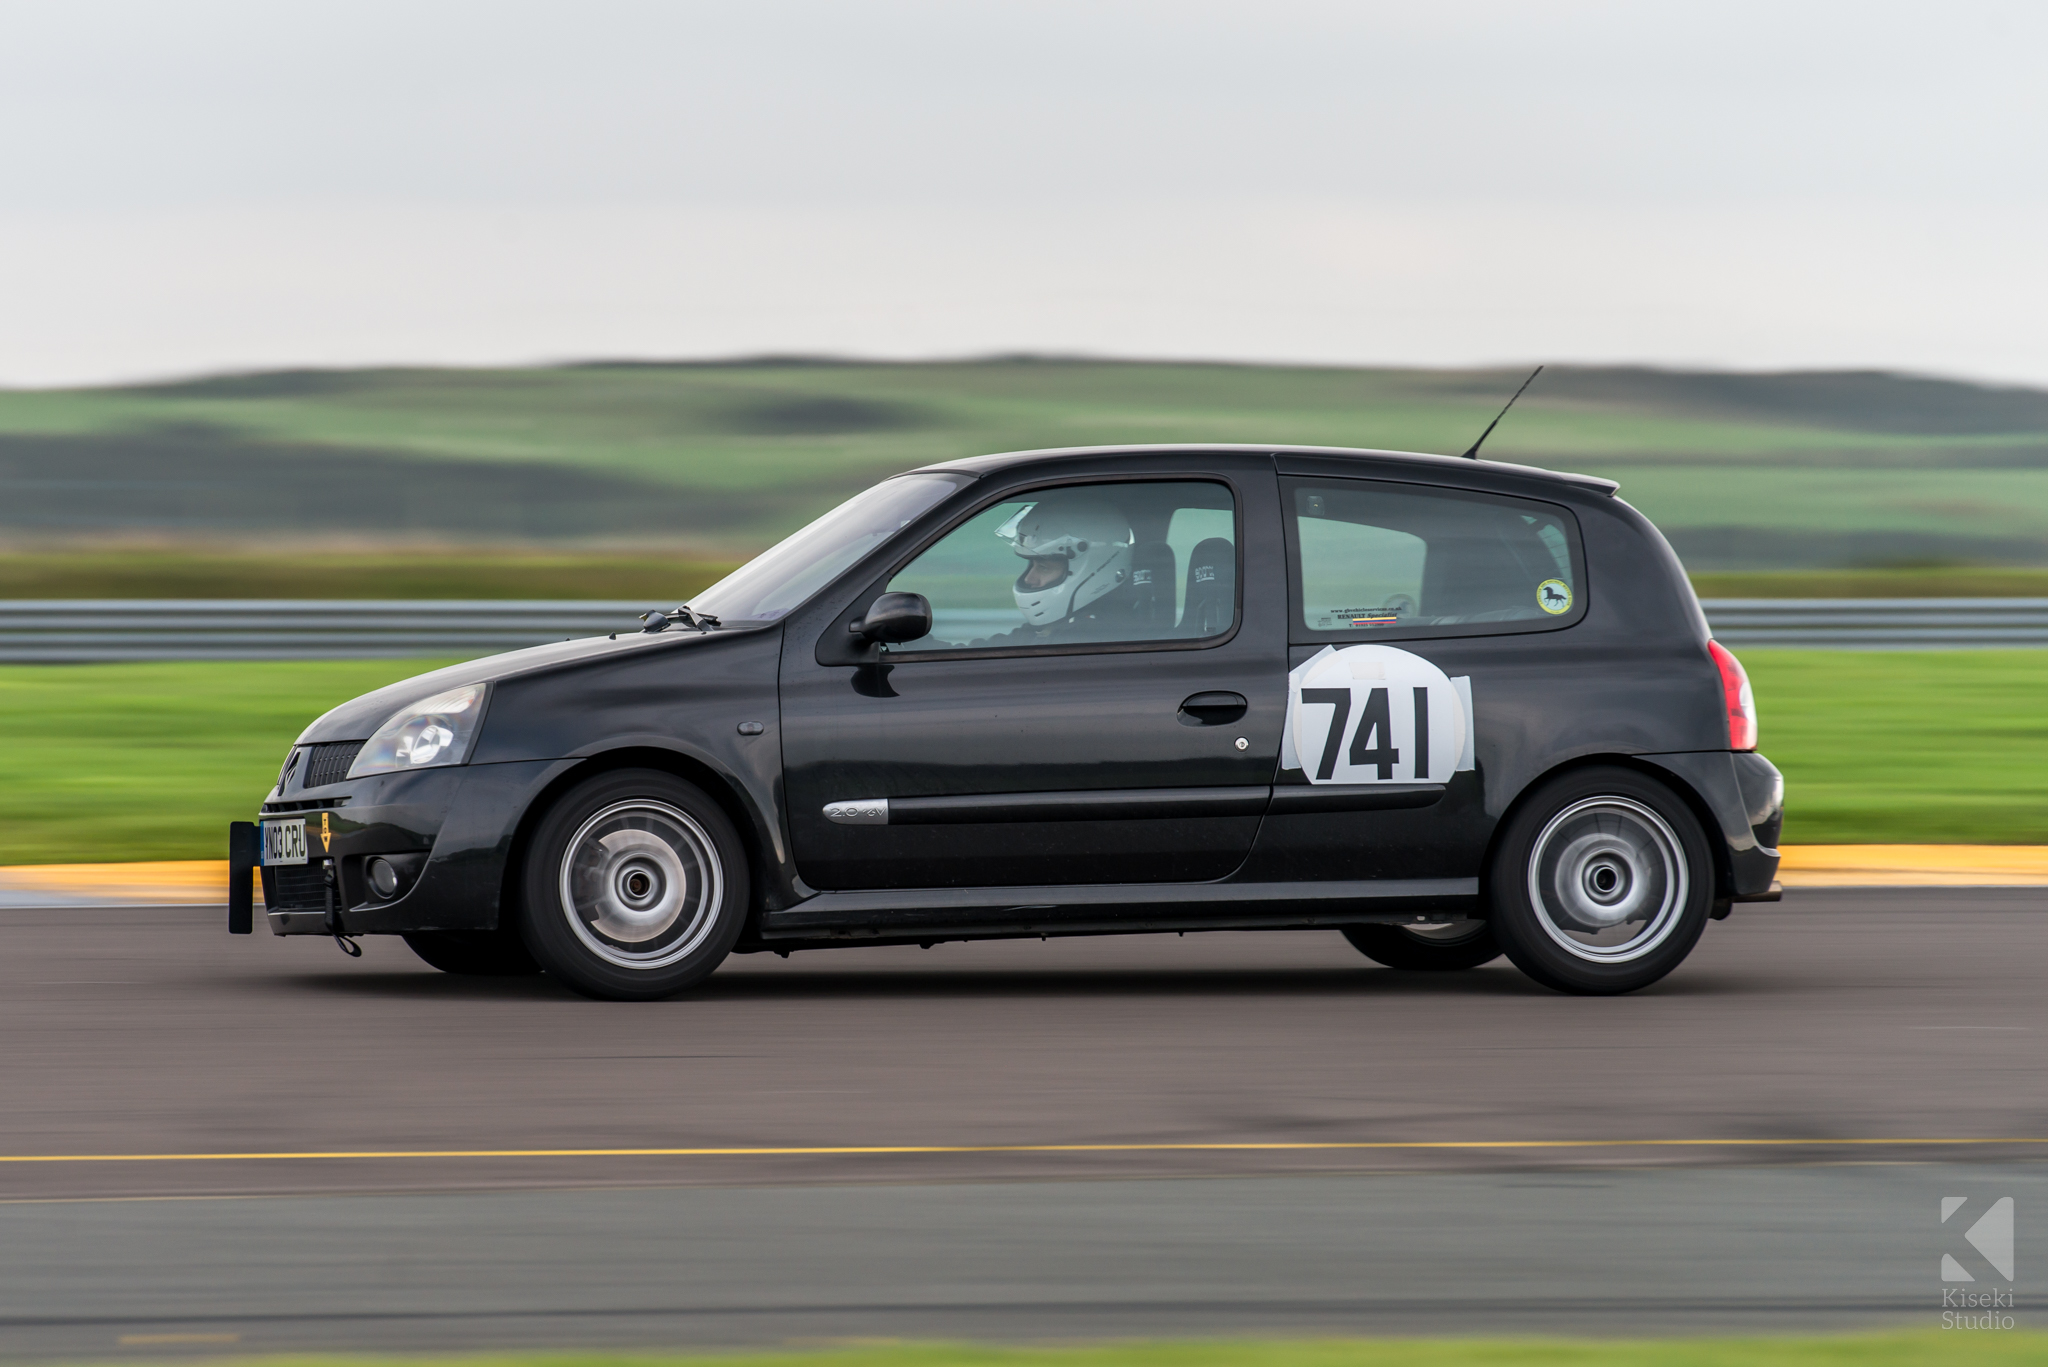 anglesey-sprint-october-renault-clio-sport-side-panning-speed-fast-wales-hillclimb.jpg